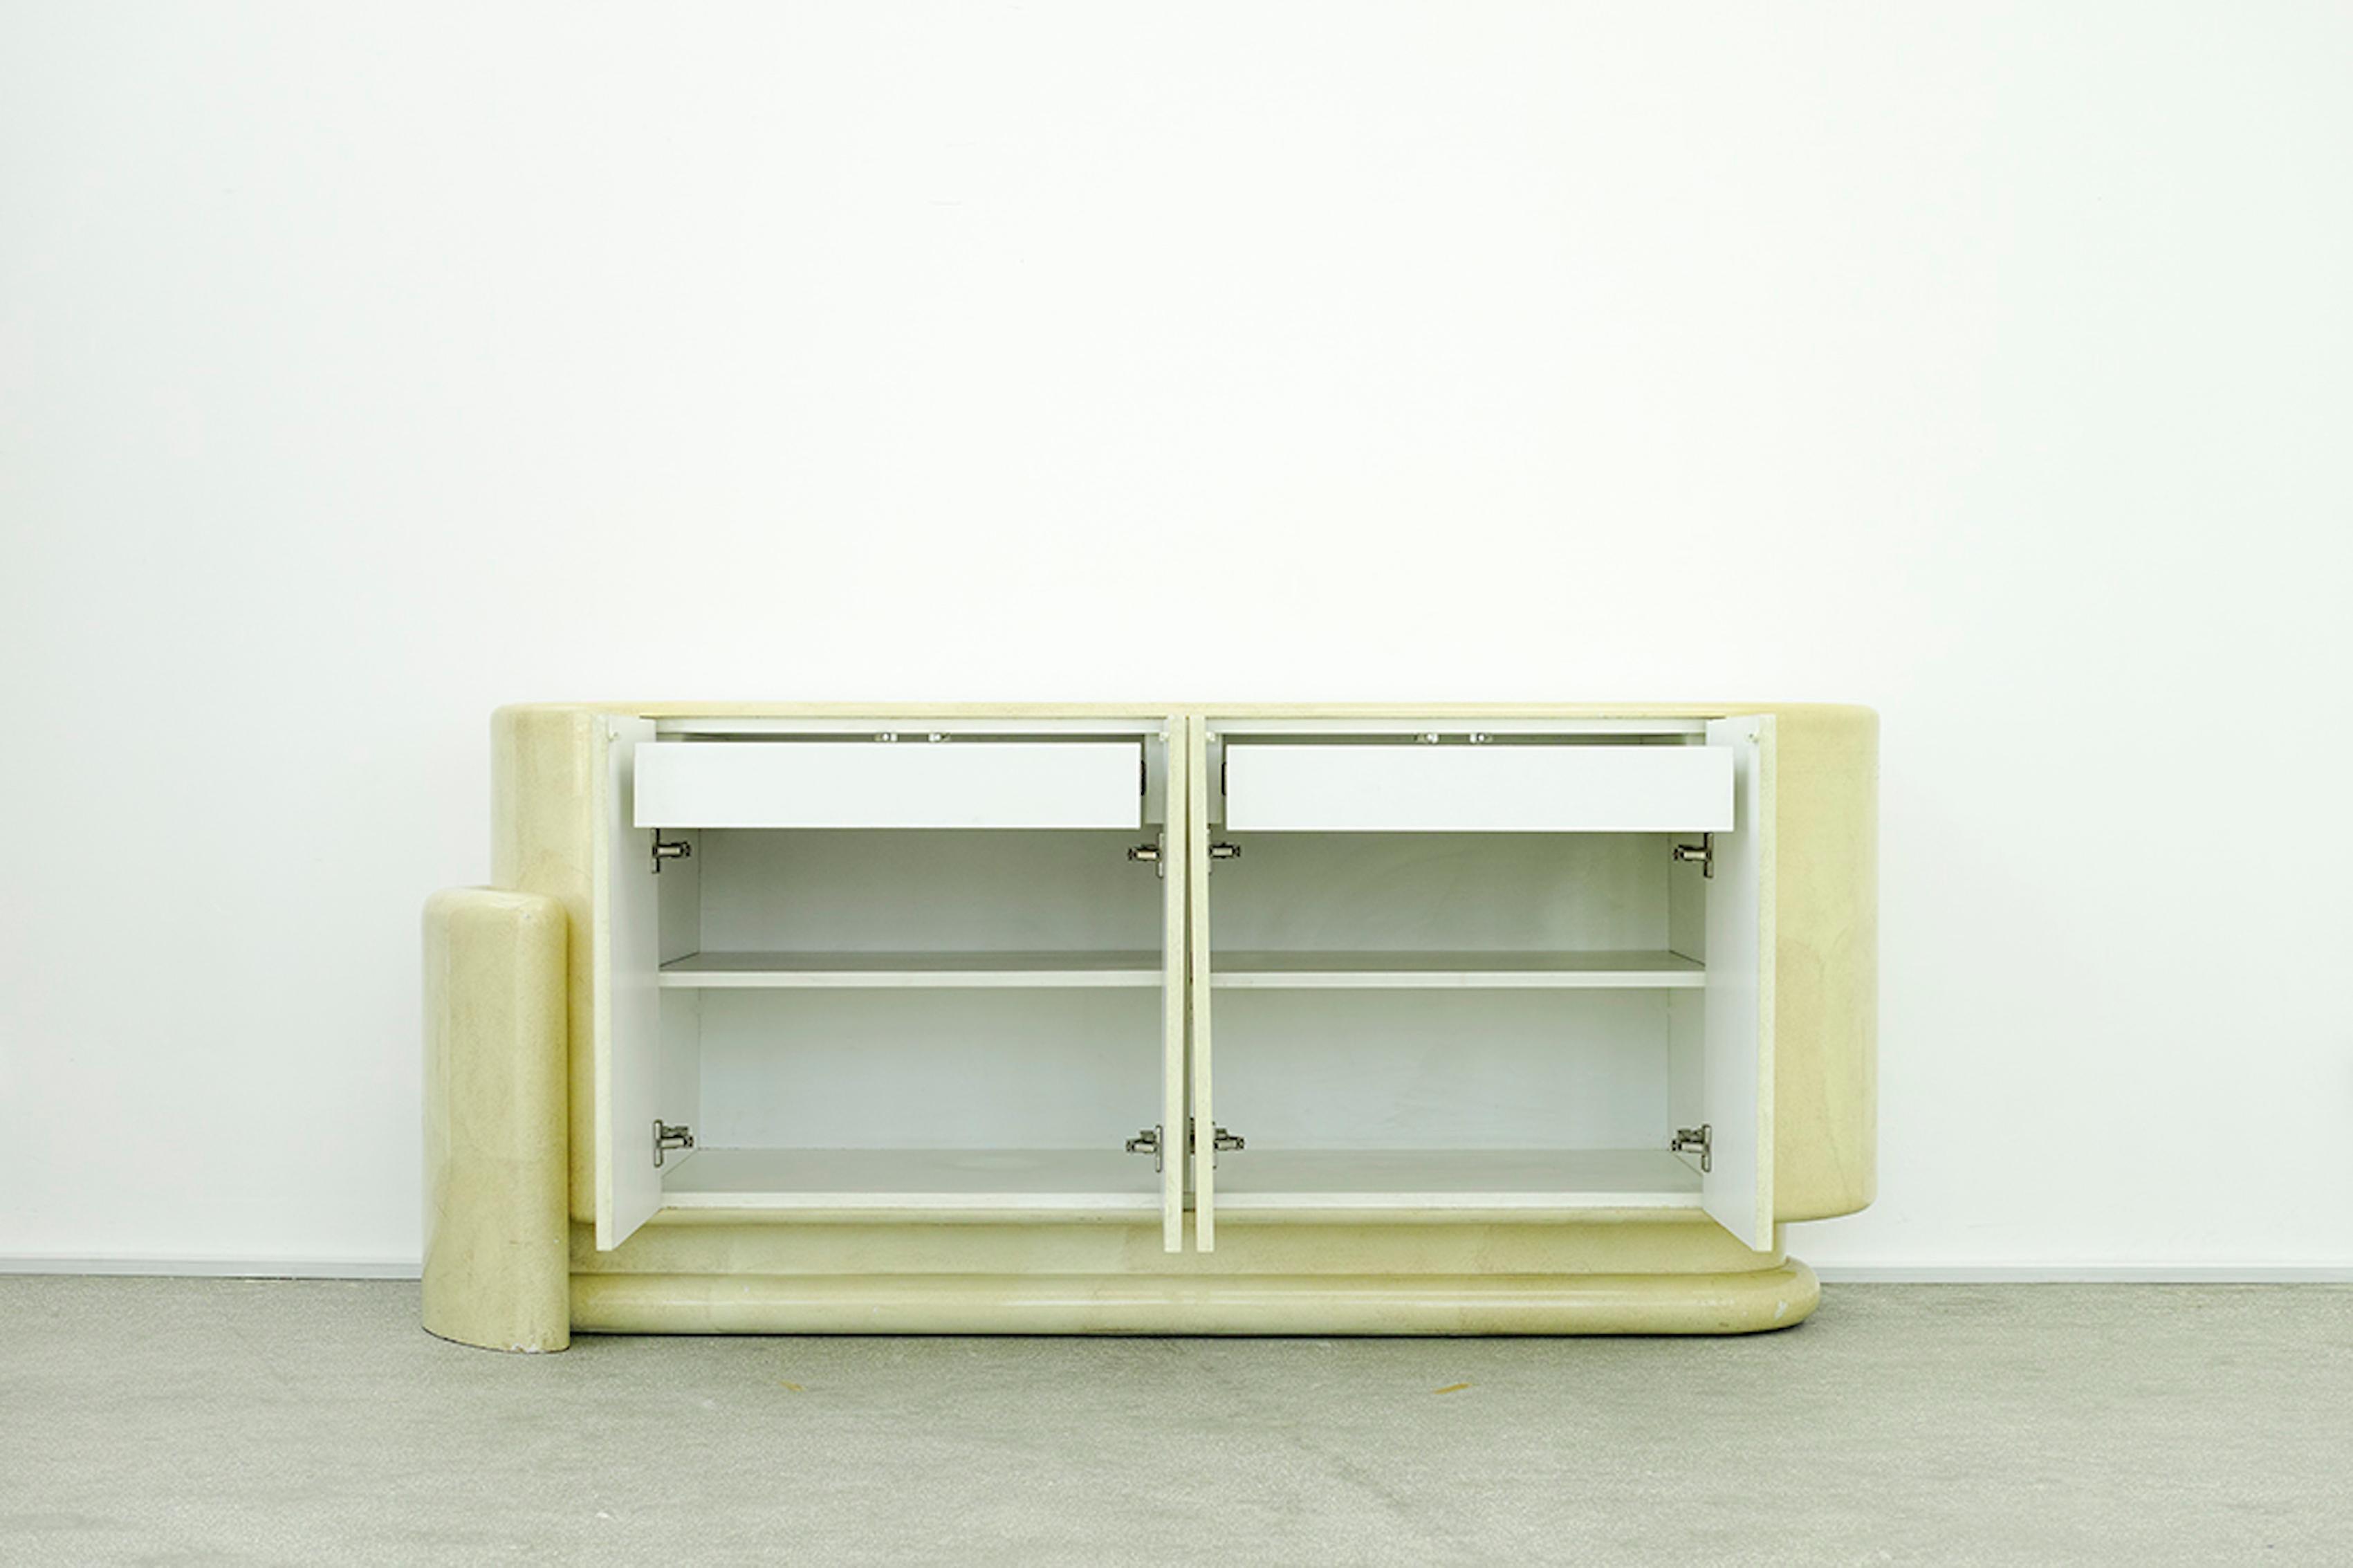 Sideboard in the style of Karl Springer, USA, 1970s
Lacquered goat skin
Interior in white laminate.